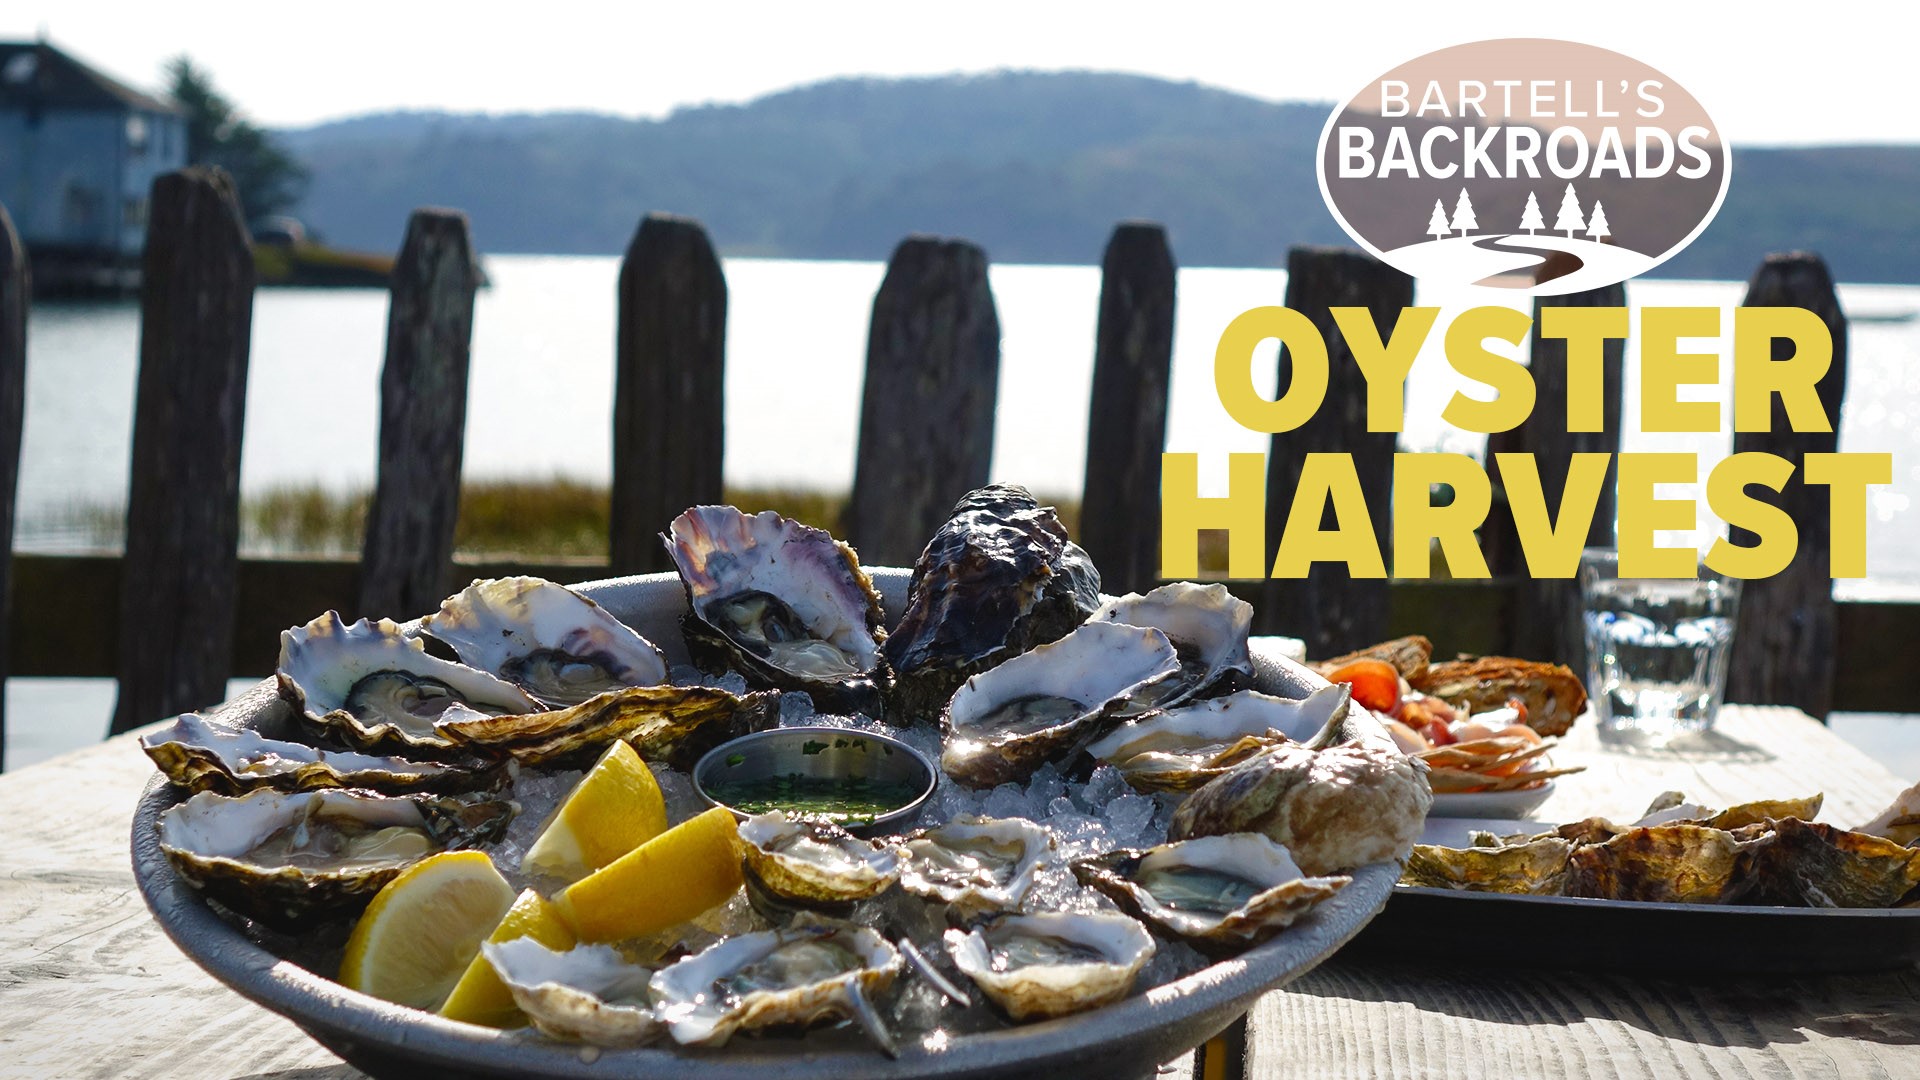 The tasty shellfish are water filters so do yourself a favor and head to Tomales Bay to eat; you are helping to clean the ocean.